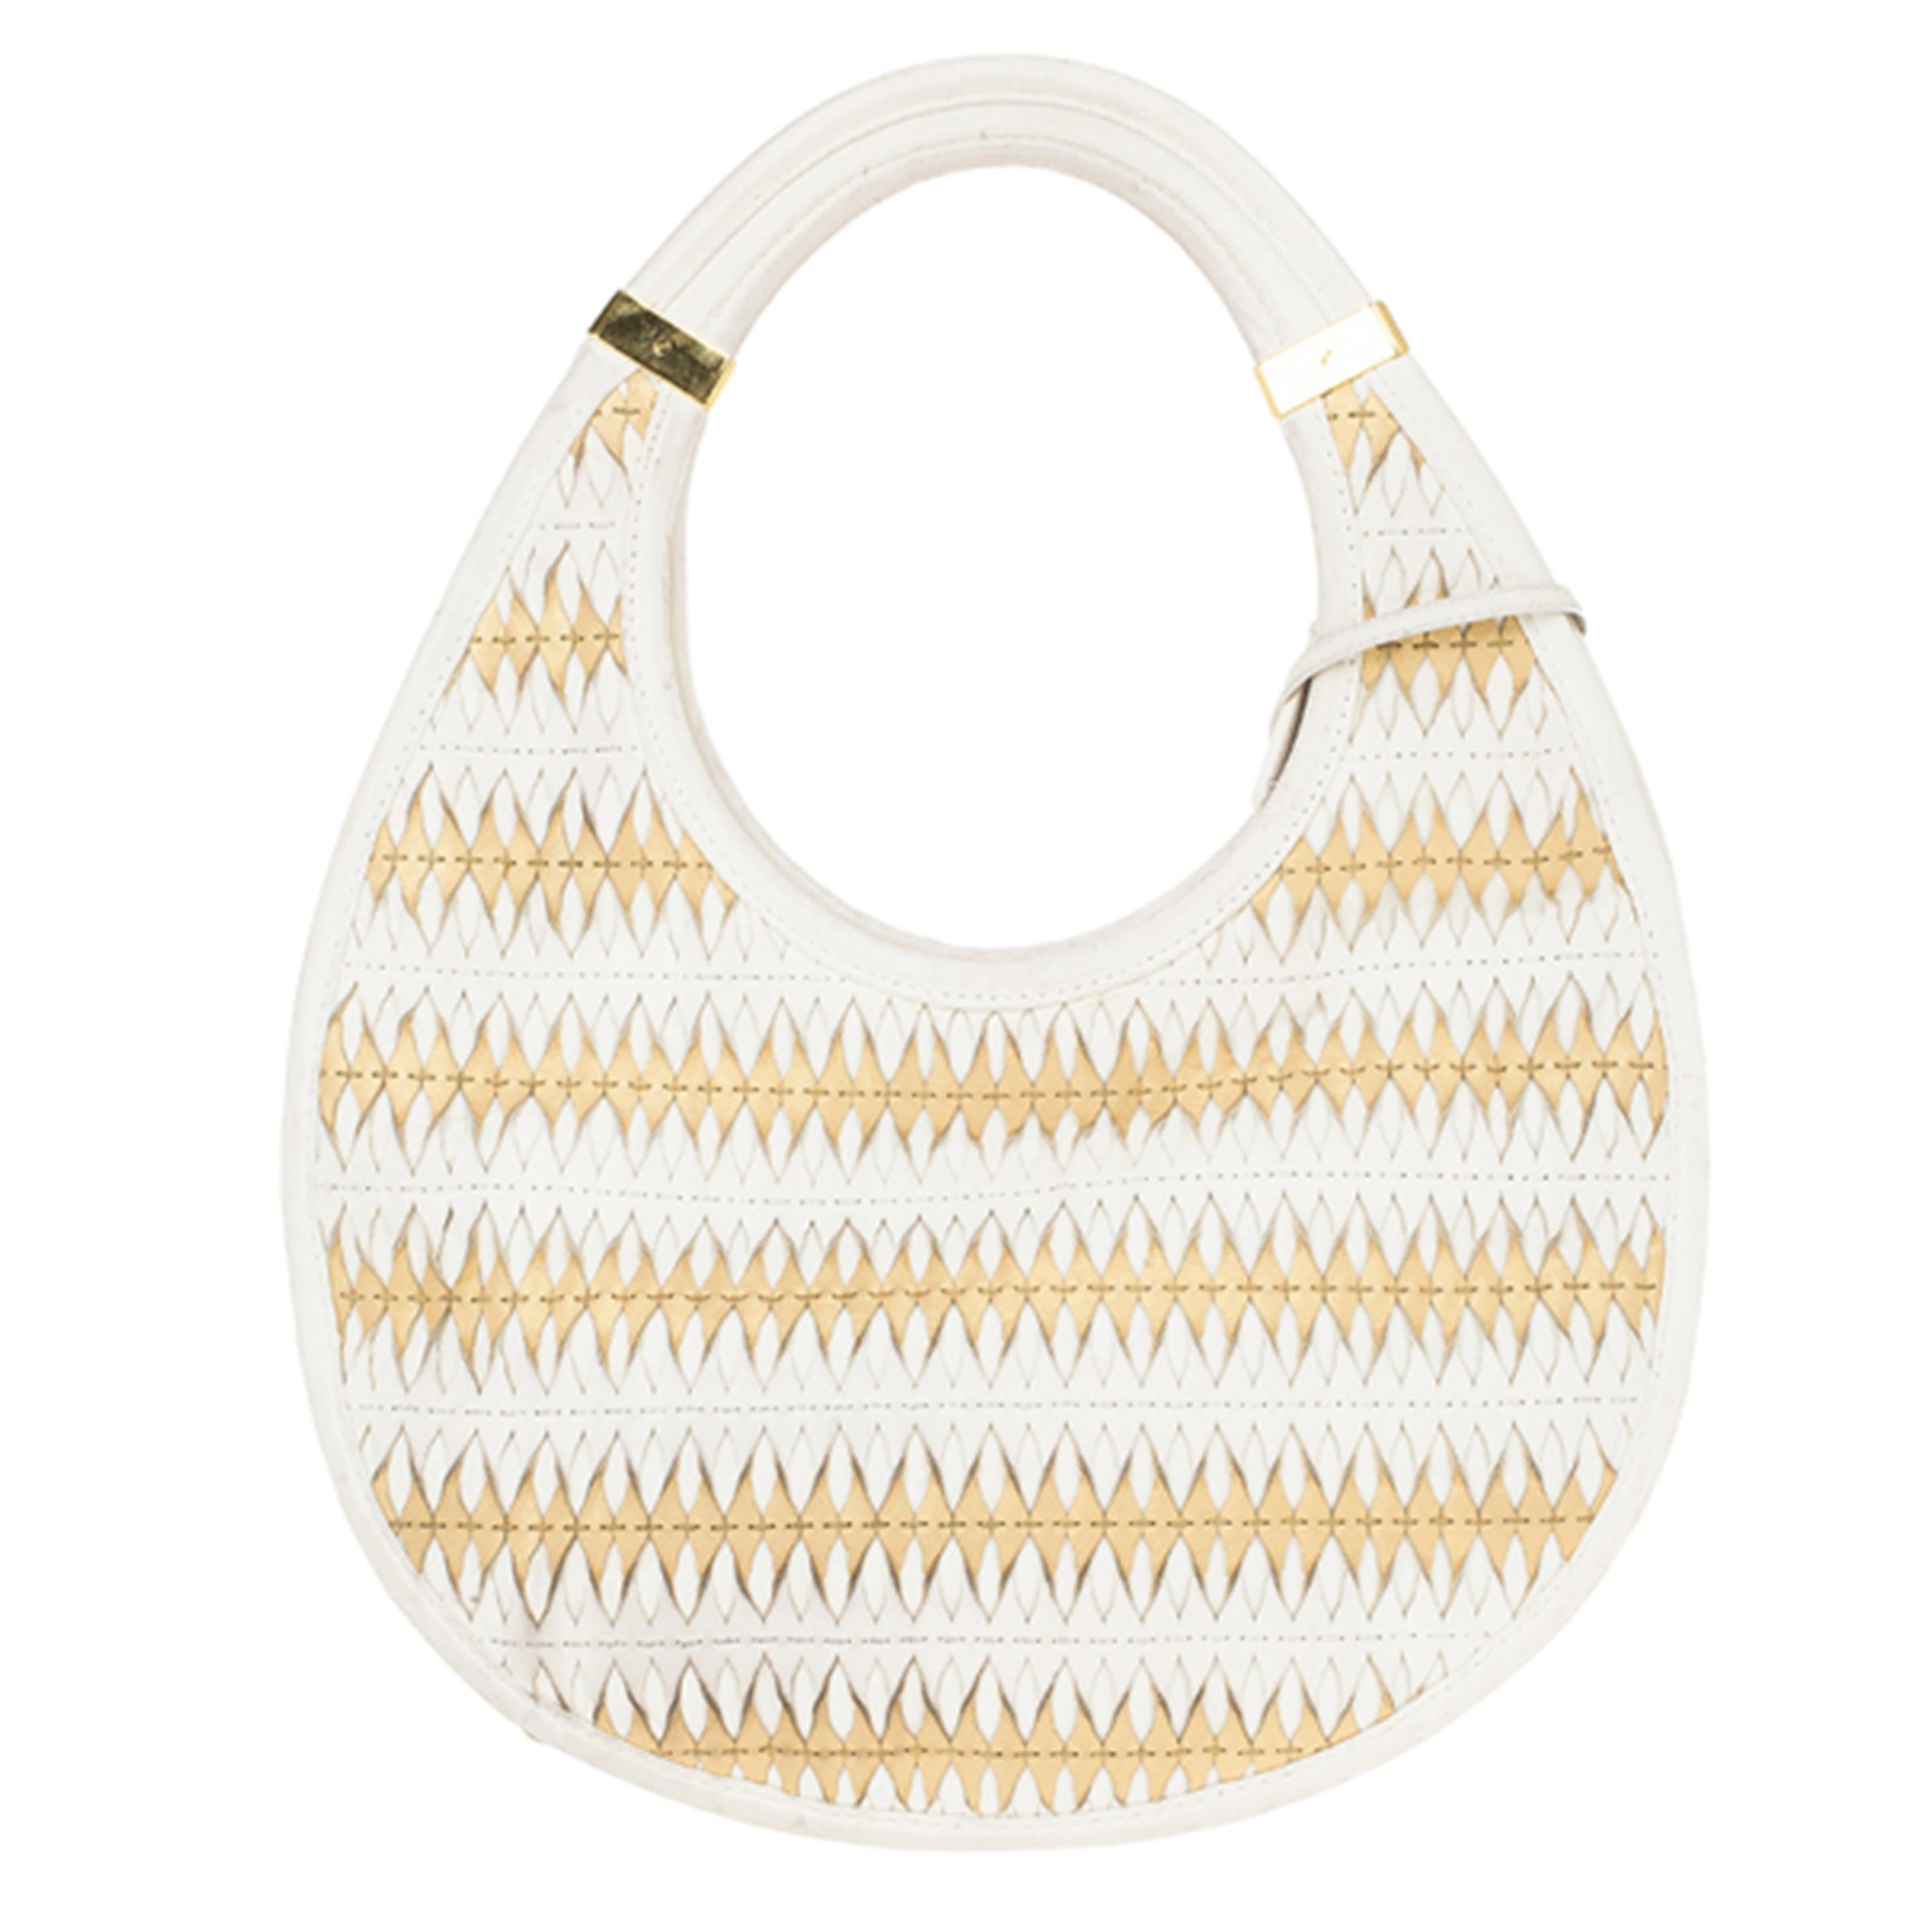 This Dior Diorita Contrast Twist Medium Hobo is definitely a collectors piece! It features woven white and beige leather and a Dior charm in gold-tone hardware. This hobo is lined with white canvas and features a single zip pocket. Add a statement